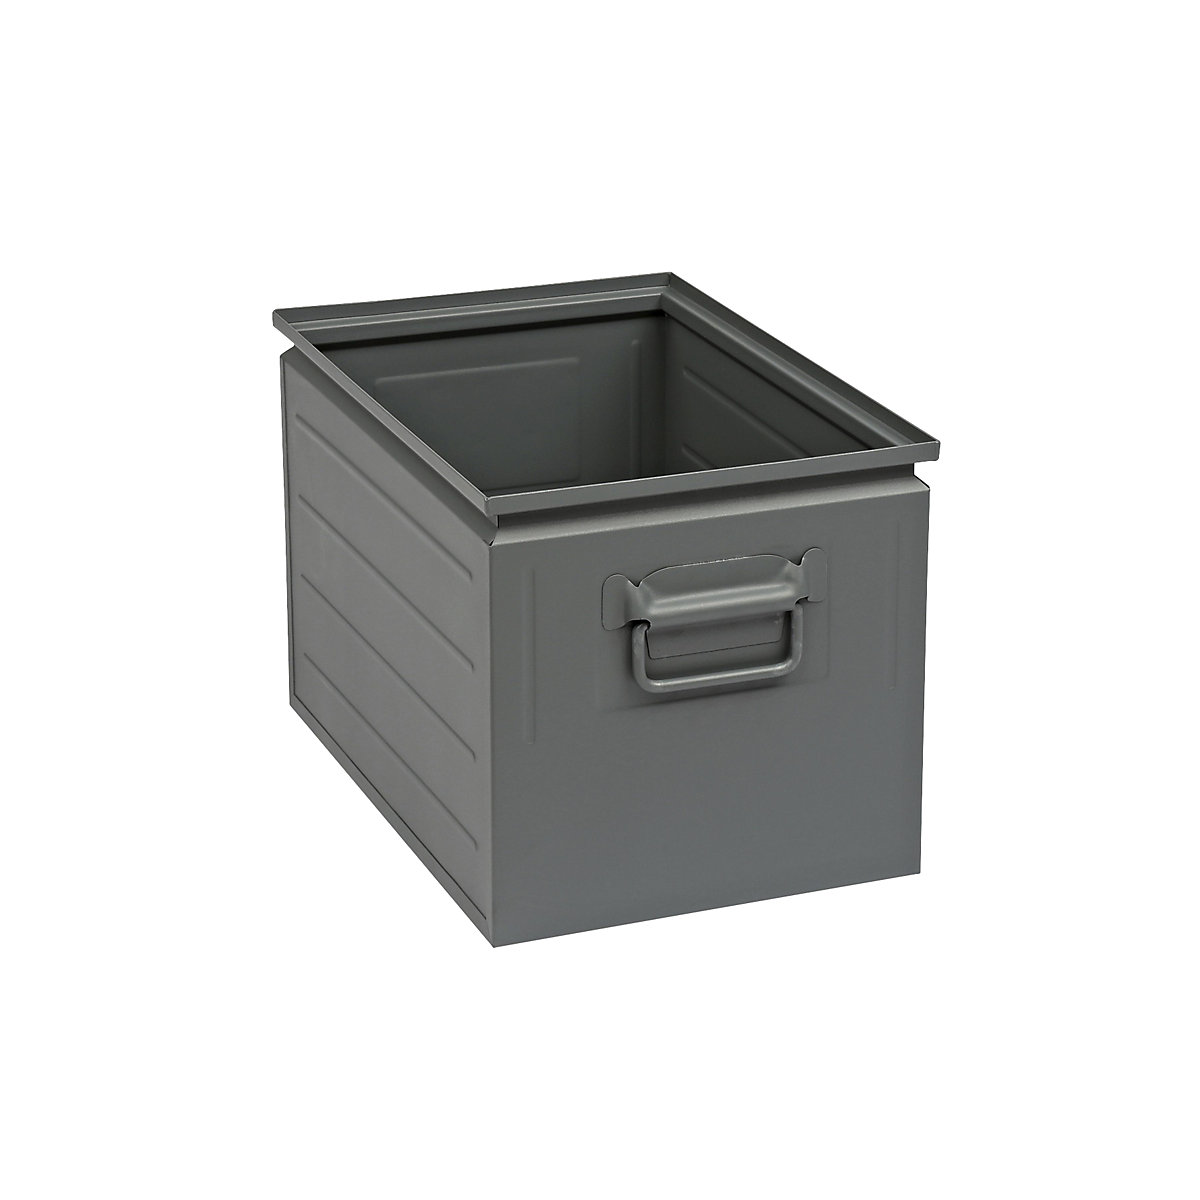 Stacking container made of sheet steel, capacity approx. 35 l, basalt grey RAL 7012